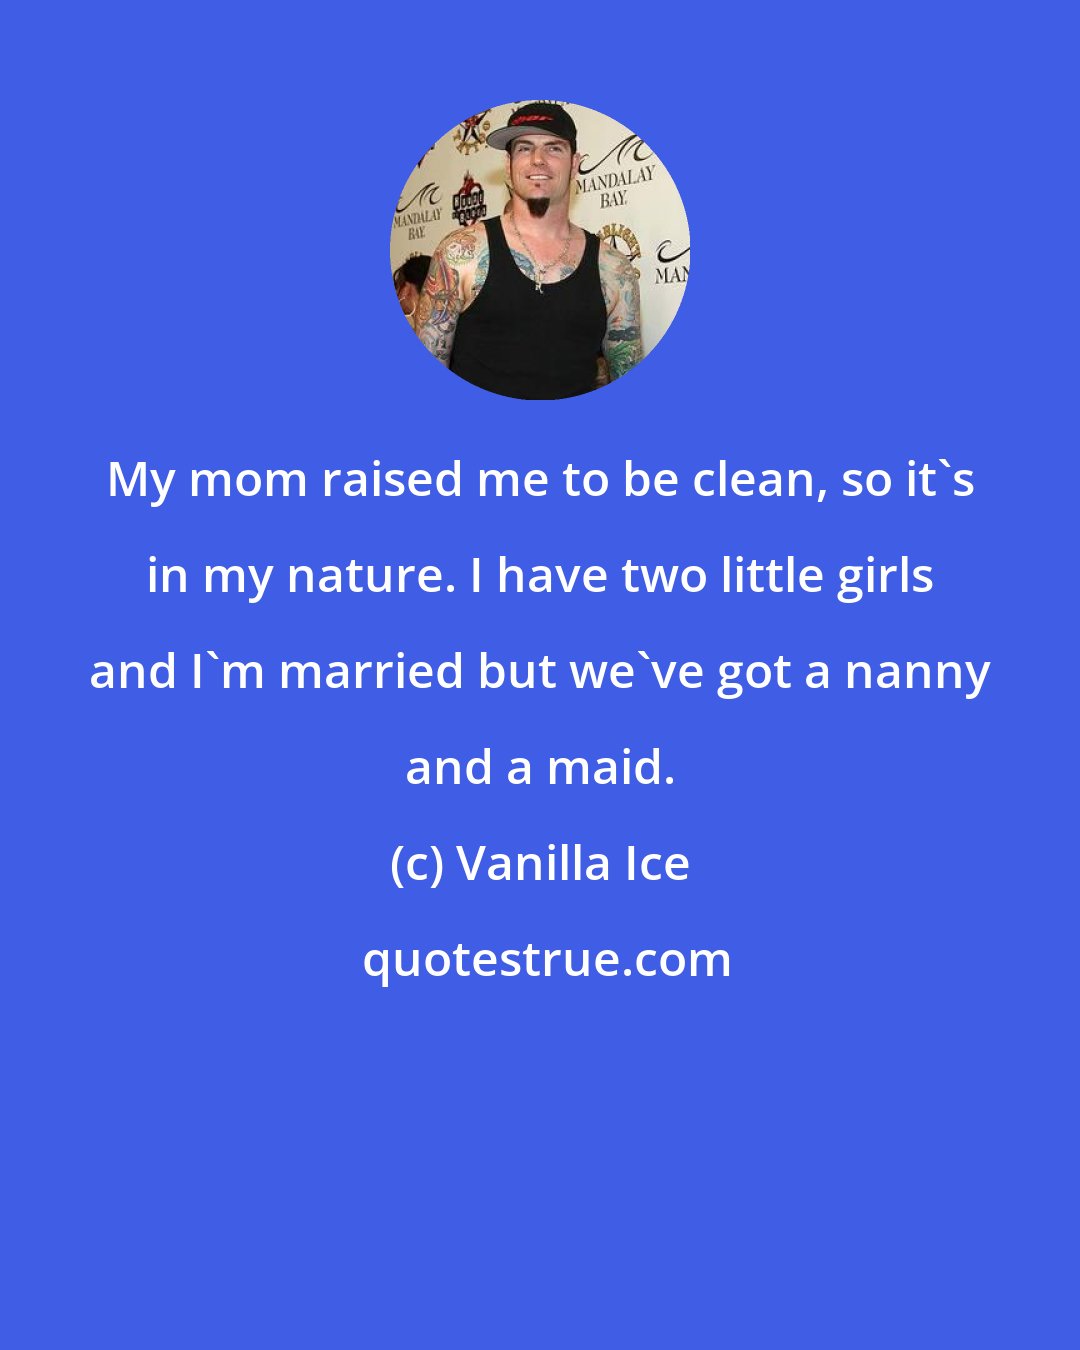 Vanilla Ice: My mom raised me to be clean, so it's in my nature. I have two little girls and I'm married but we've got a nanny and a maid.